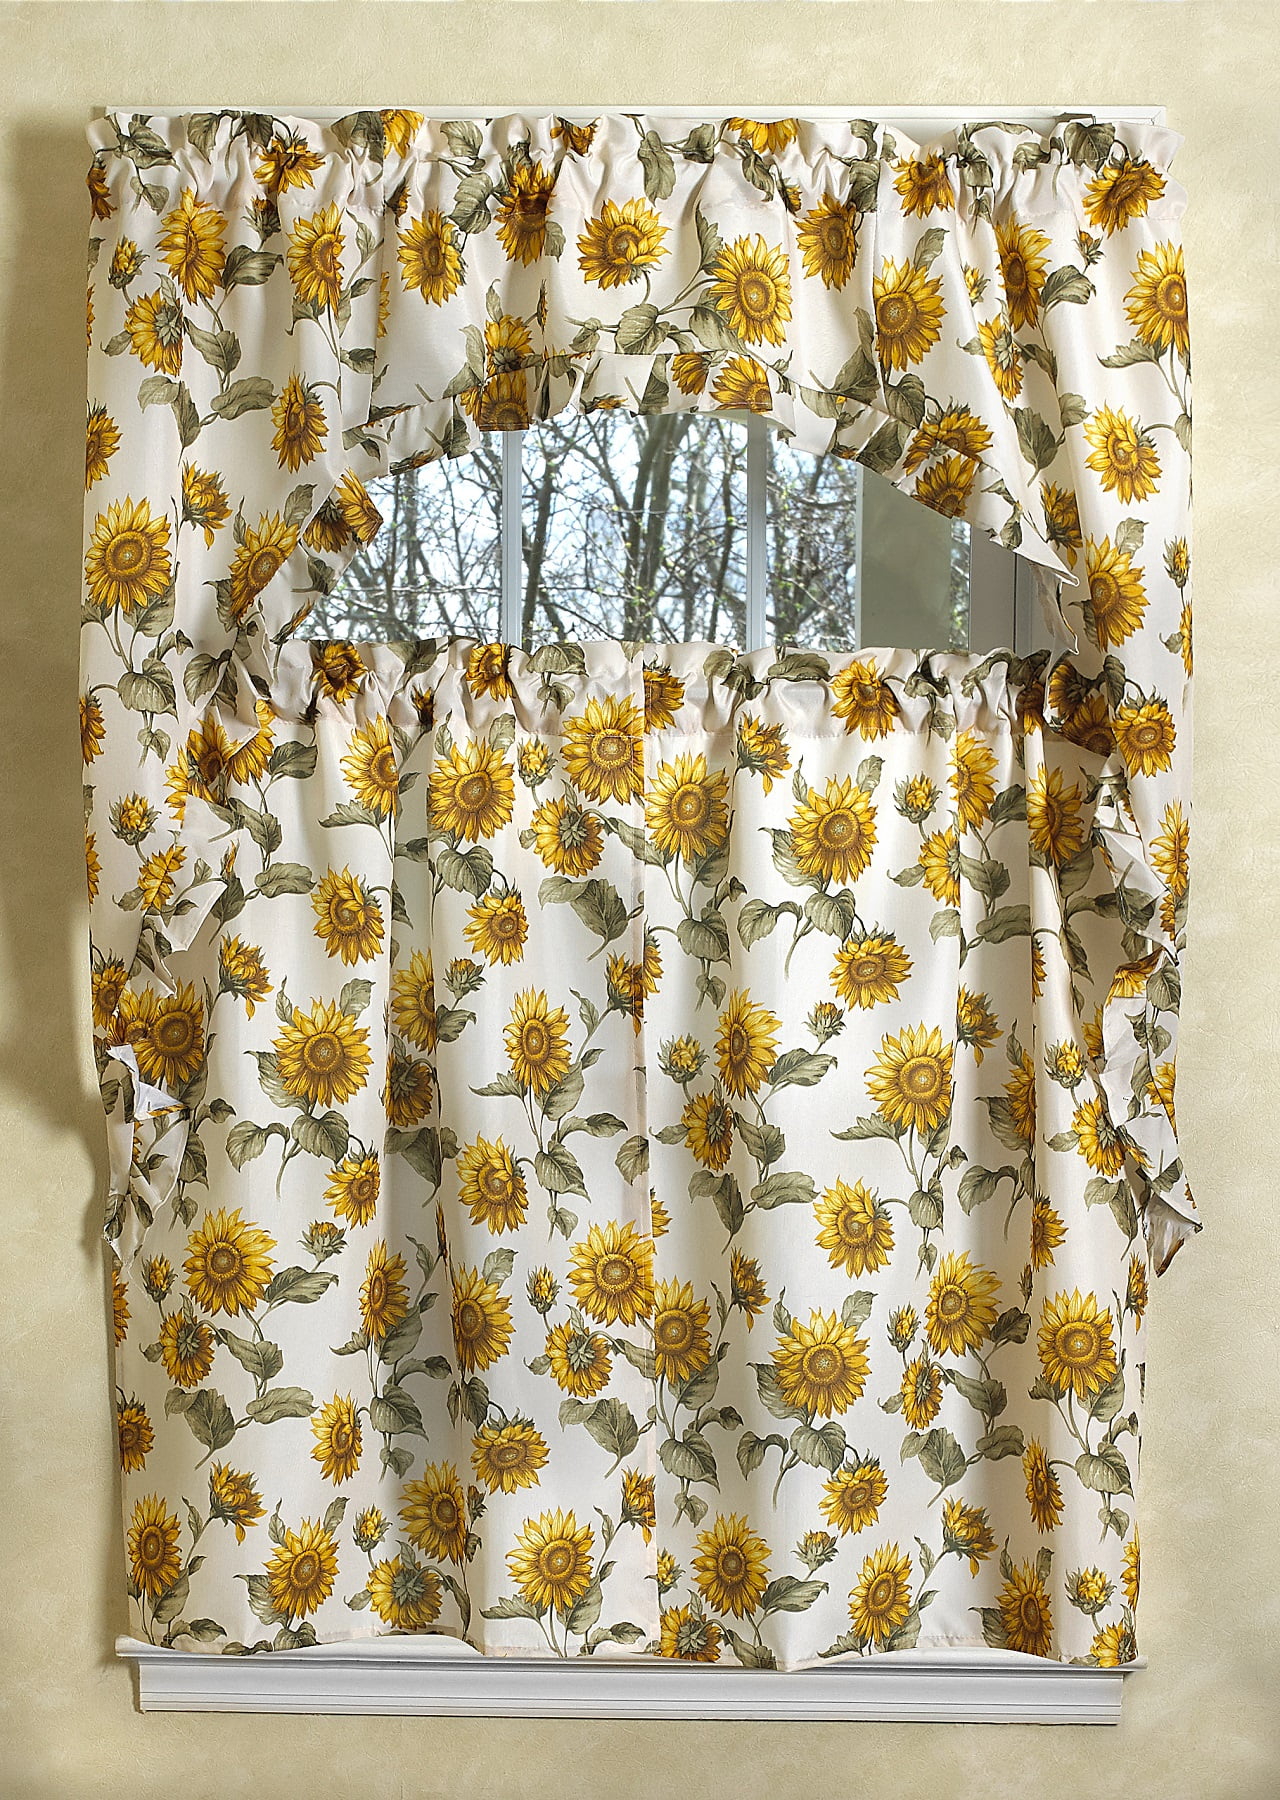 3pc  Printed Kitchen Curtains Set 60"x36" SUNFLOWERS BASKET,LX 2 Tiers & Swag 